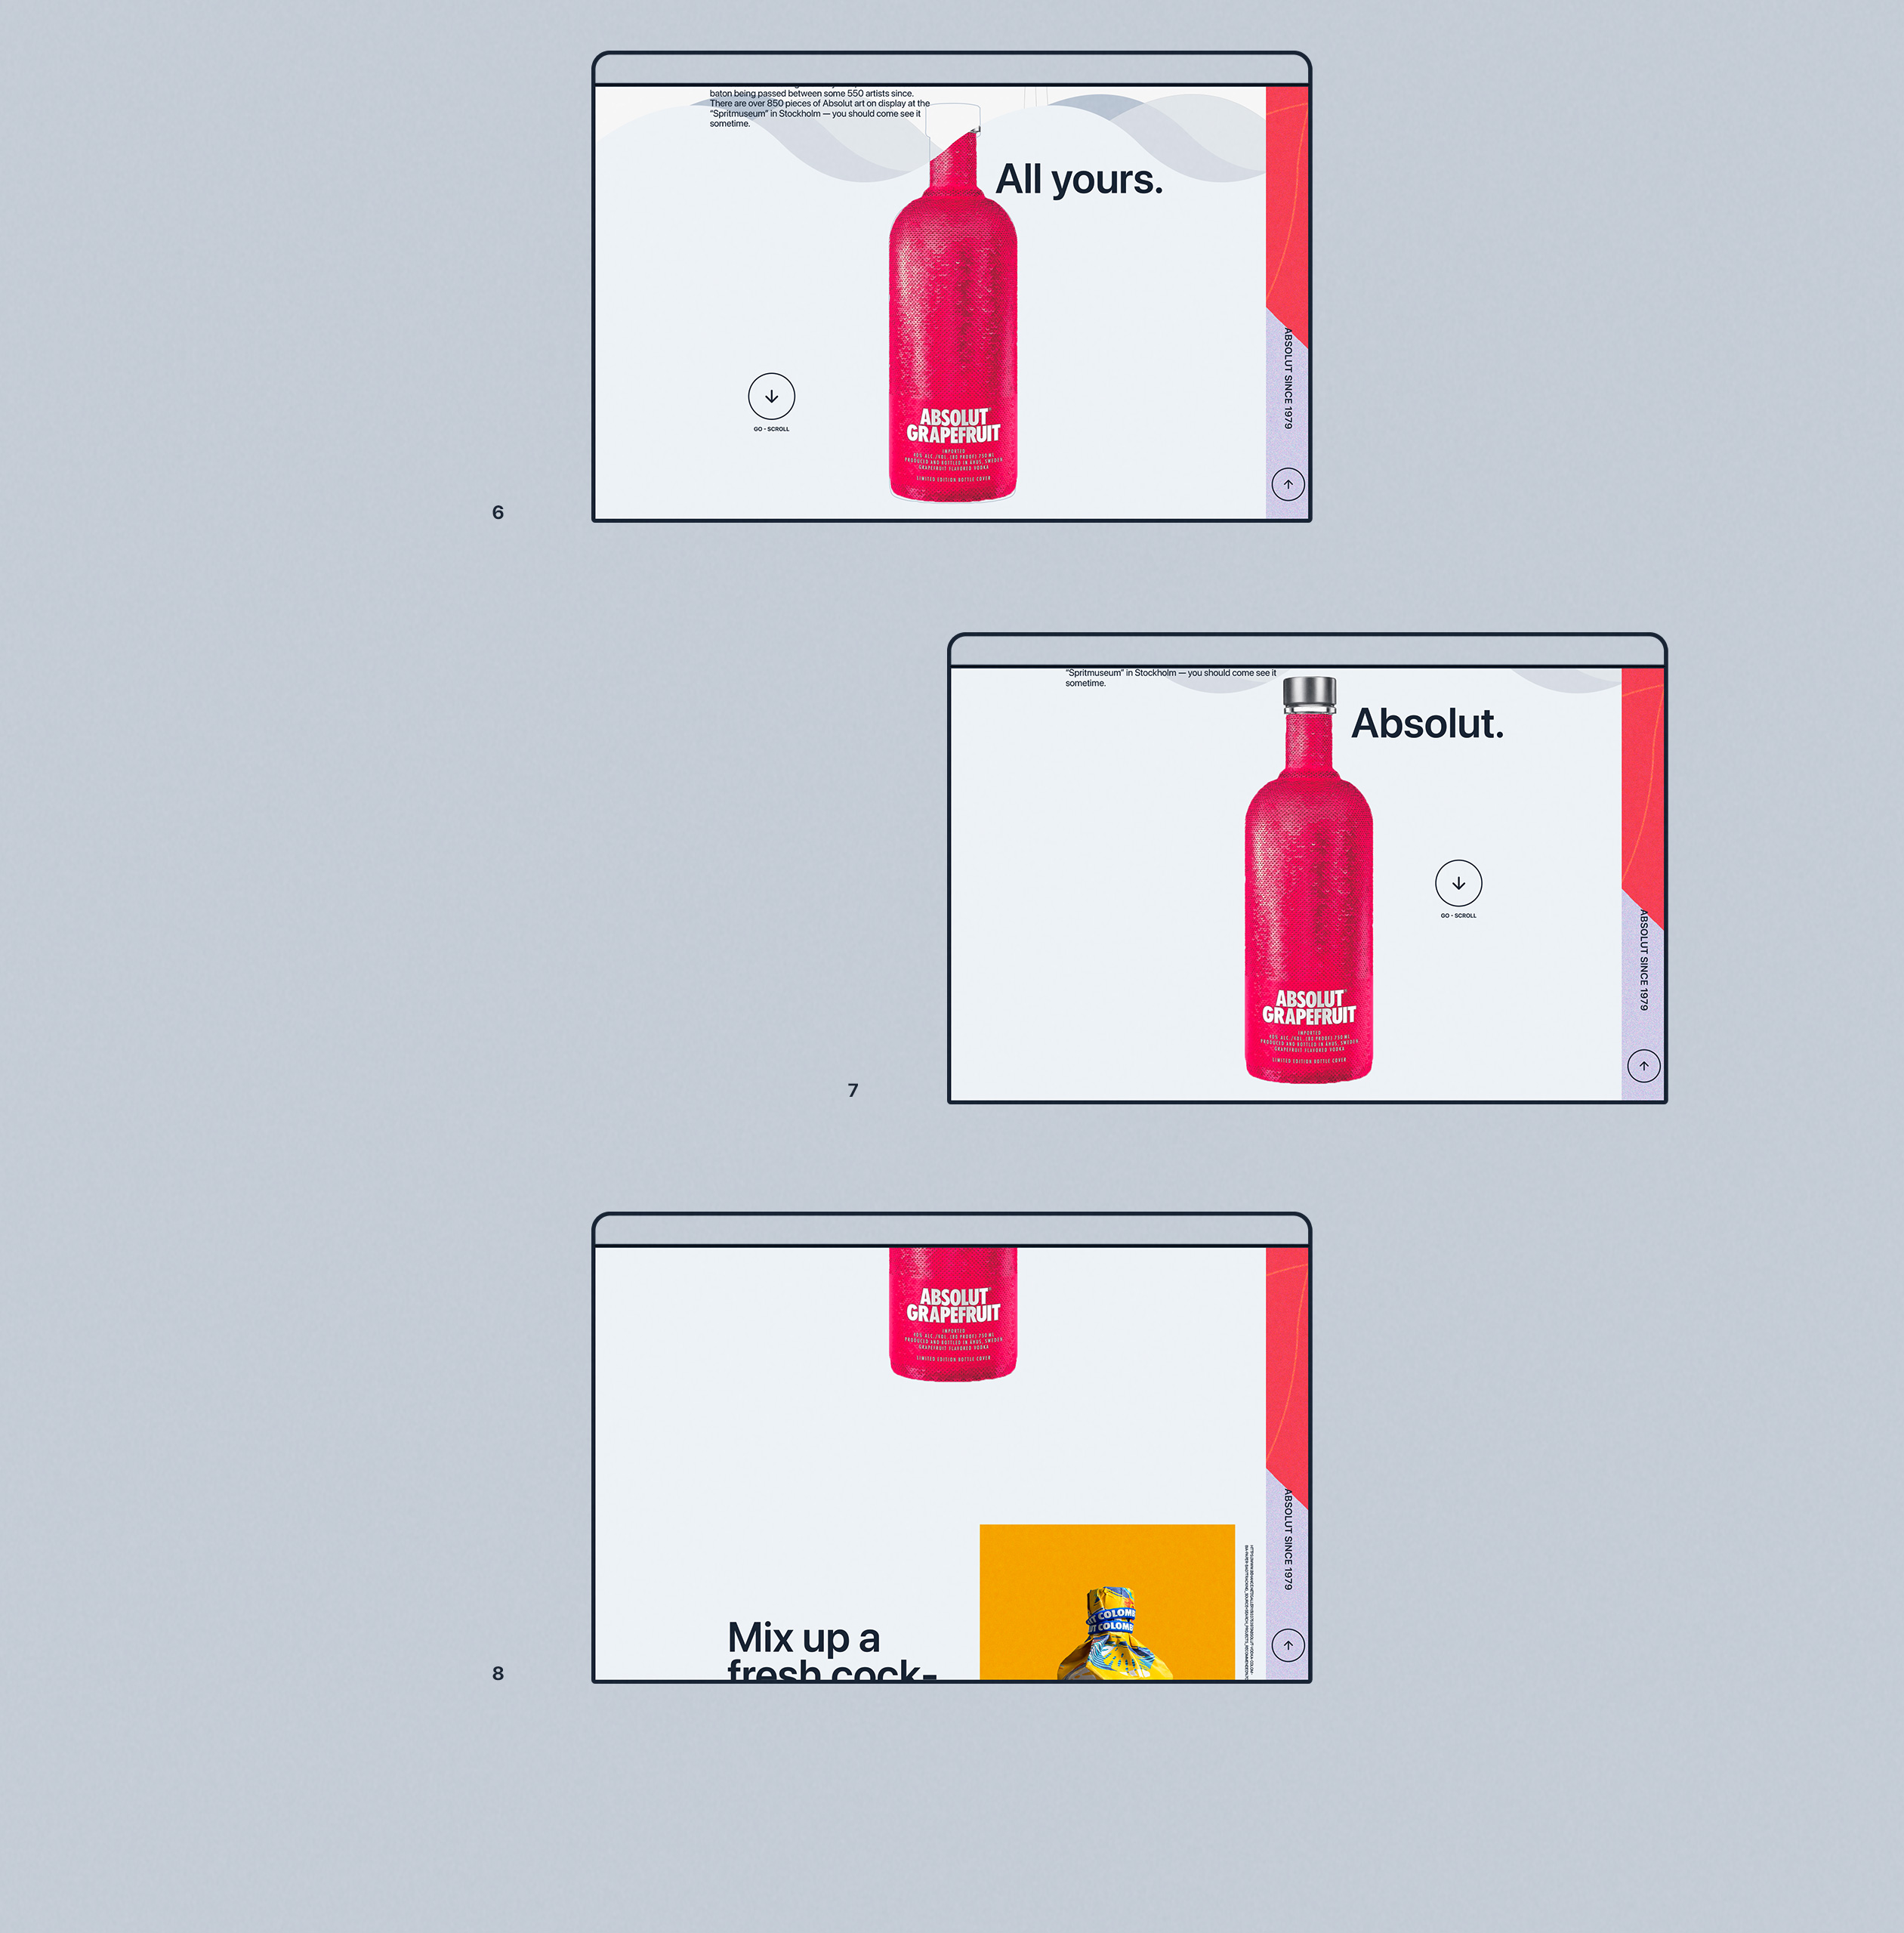 Absolut vodka website and branding redesign concept for 43 years in the market celebration.